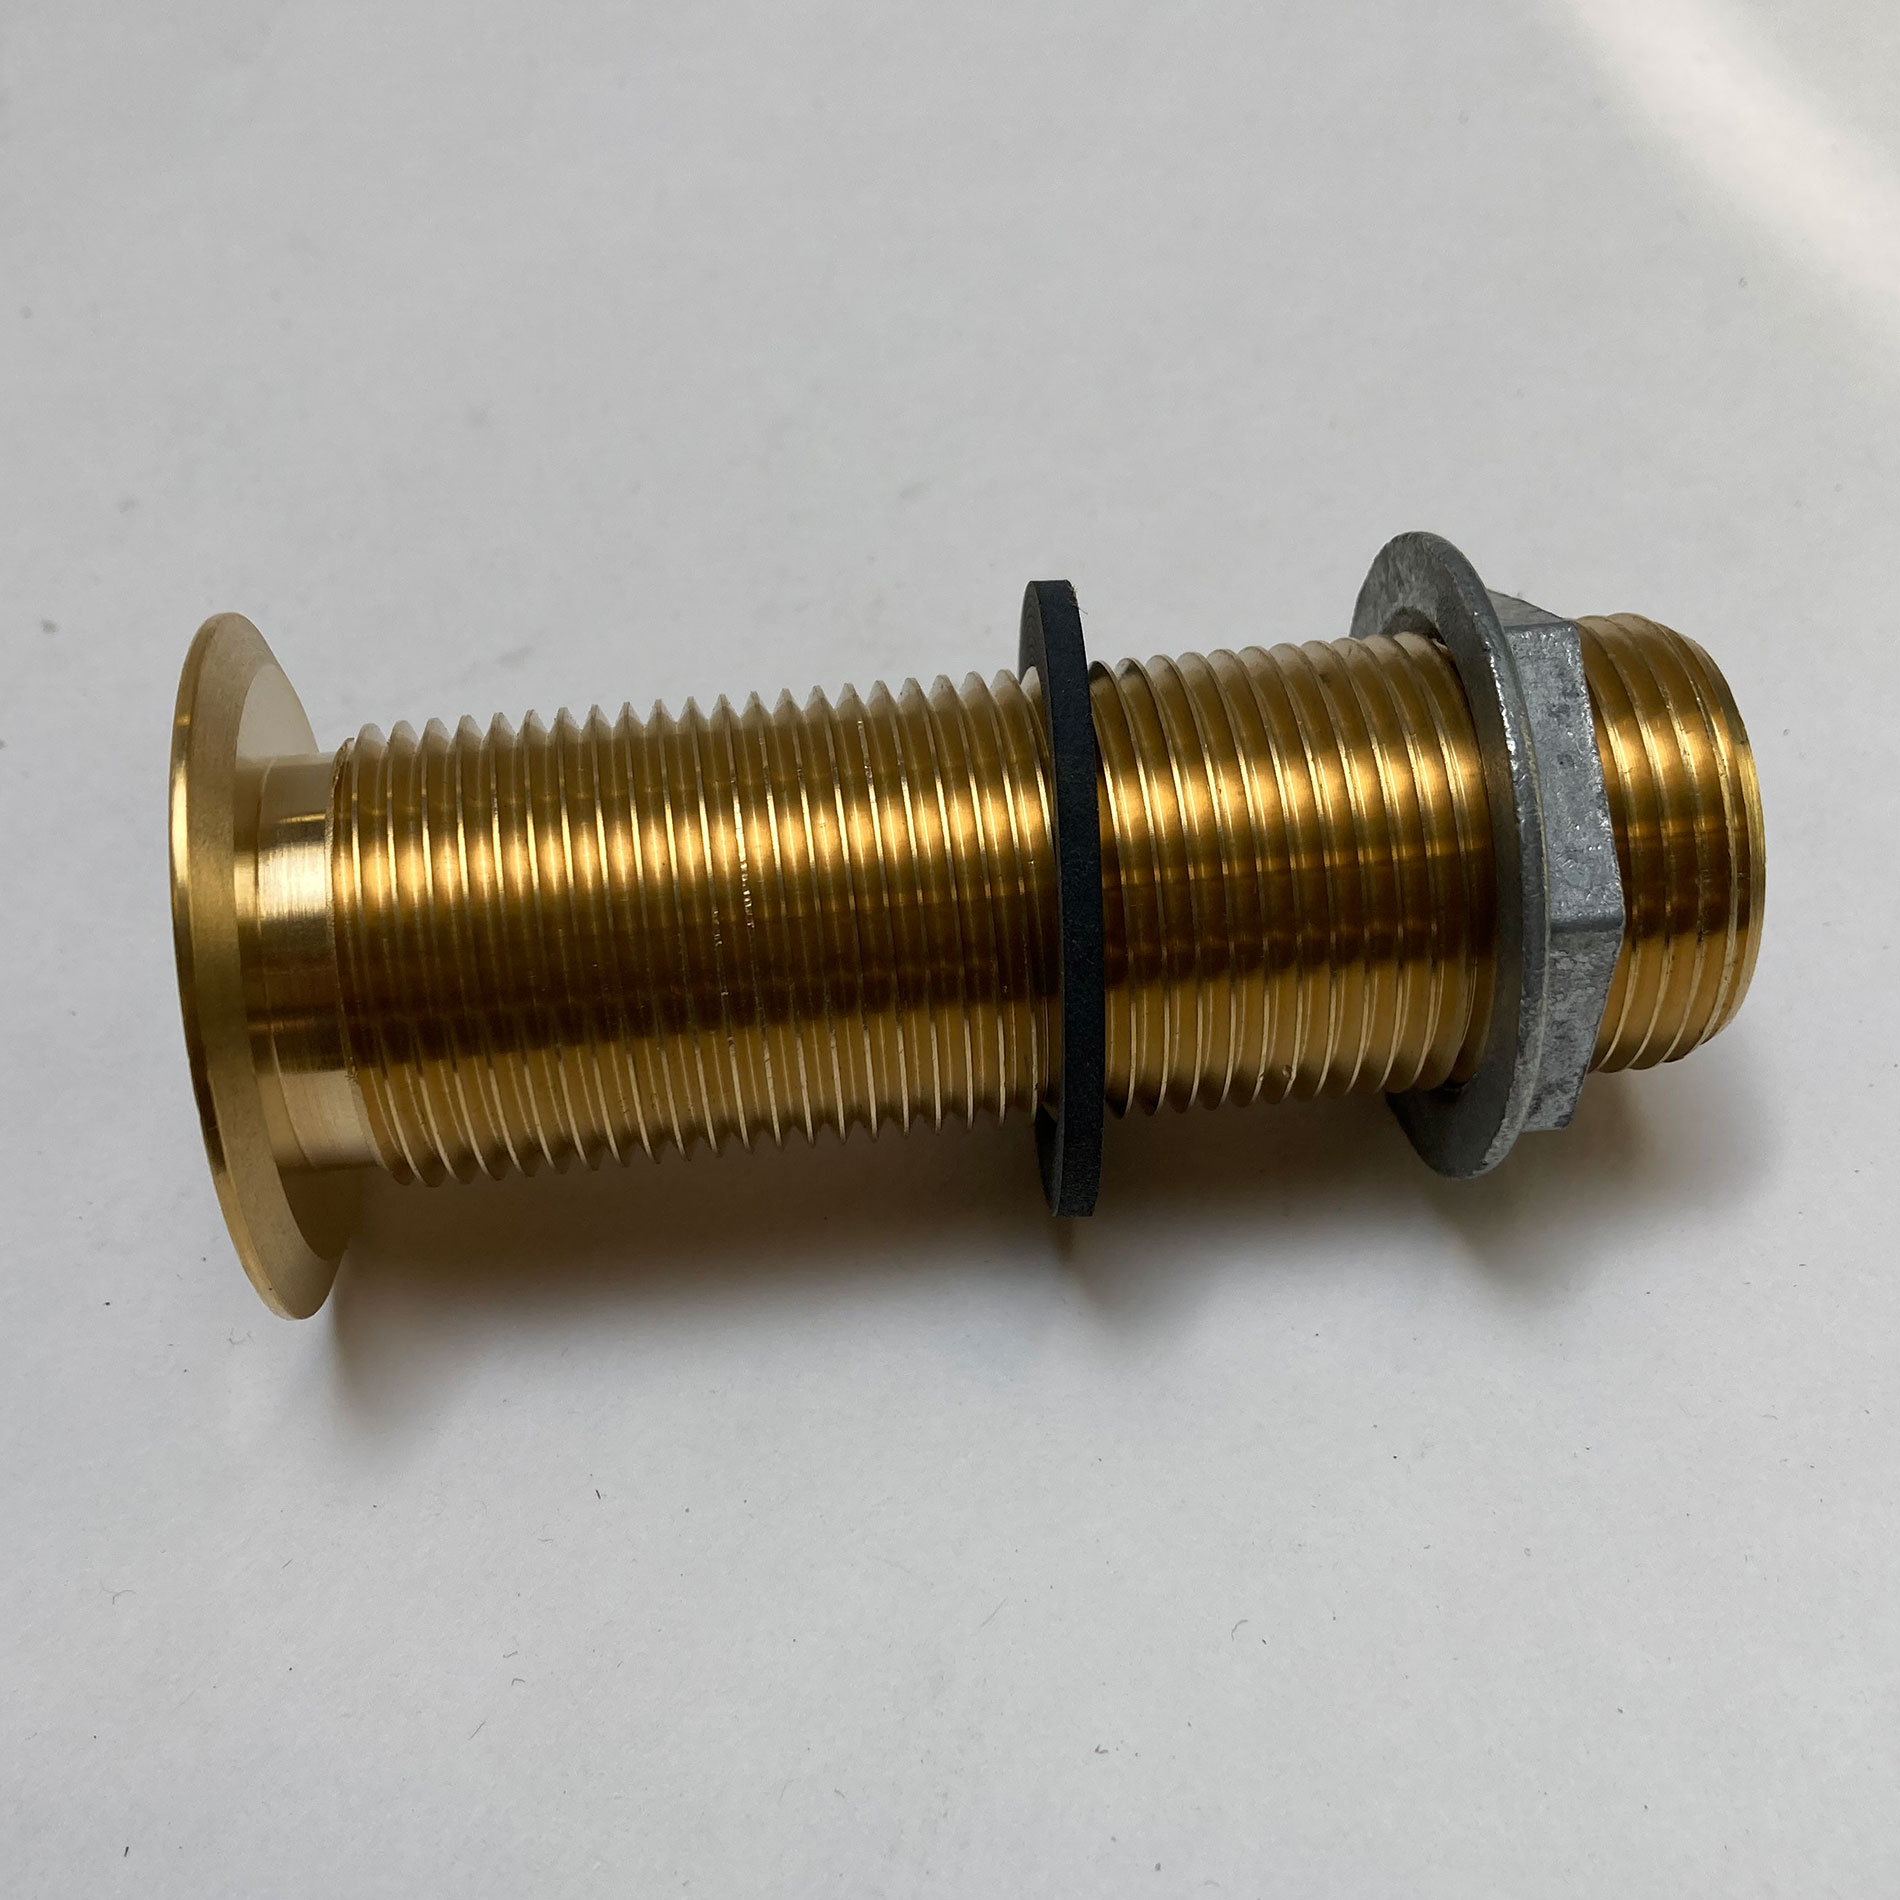 Nickel Plated Brass Waste Drain with Locknut and Rubber Washer, #24-DC-image